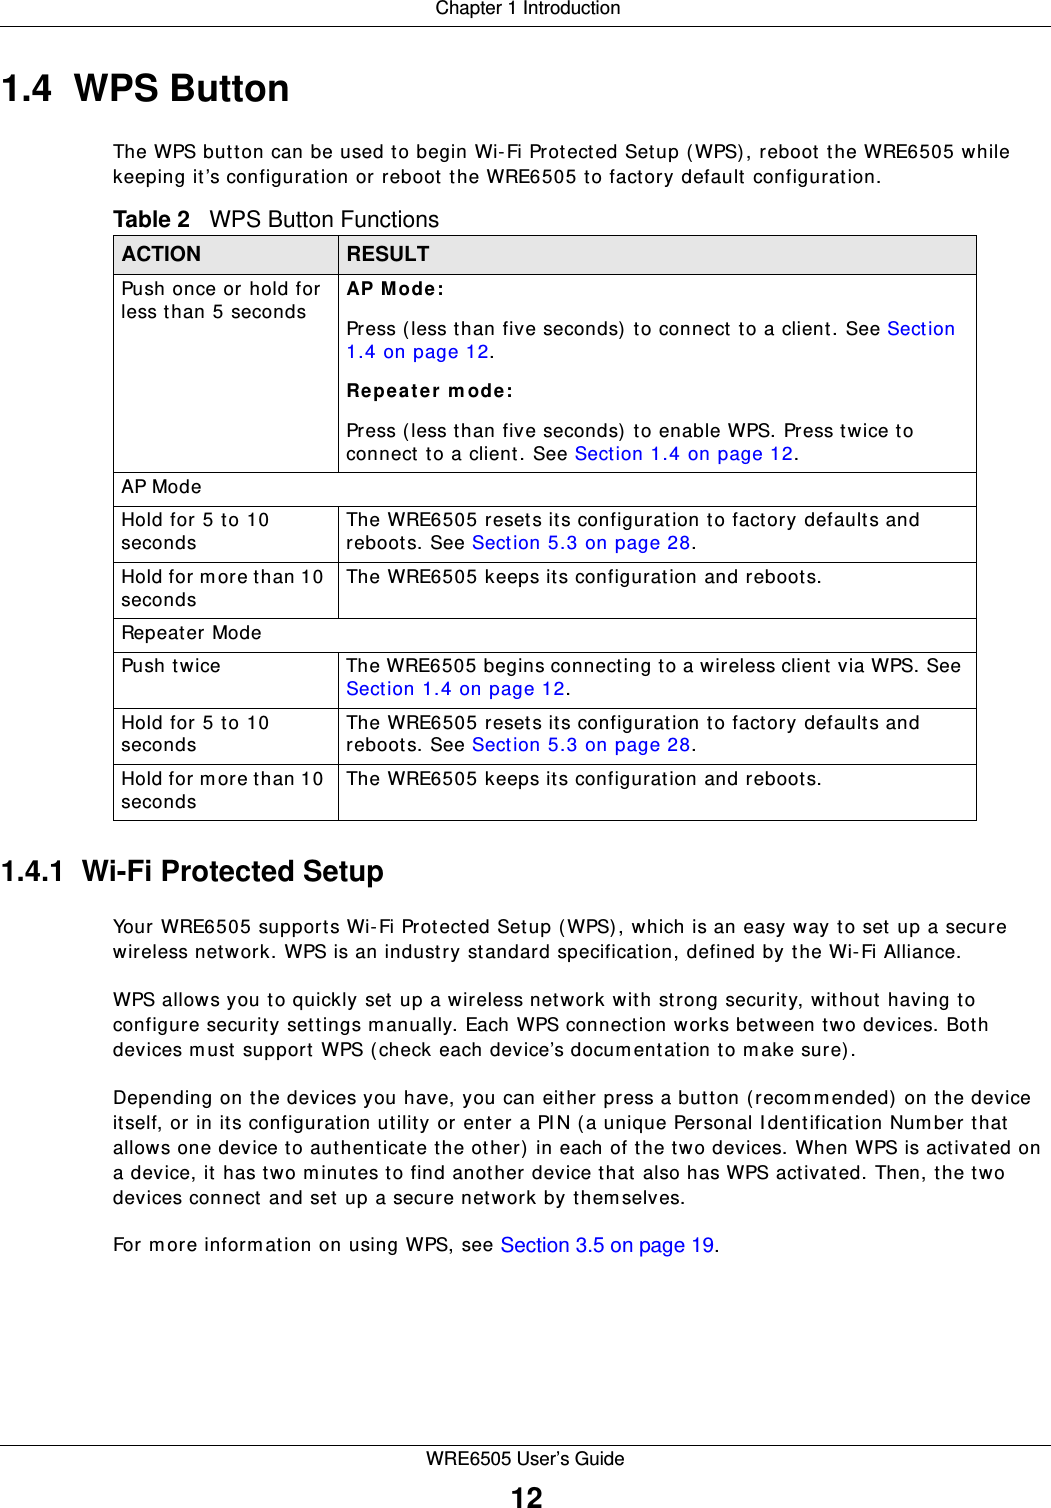  Chapter 1 IntroductionWRE6505 User’s Guide121.4  WPS ButtonThe WPS button can be used to begin Wi-Fi Protected Setup (WPS), reboot the WRE6505 while keeping it’s configuration or reboot the WRE6505 to factory default configuration.1.4.1  Wi-Fi Protected SetupYour WRE6505 supports Wi-Fi Protected Setup (WPS), which is an easy way to set up a secure wireless network. WPS is an industry standard specification, defined by the Wi-Fi Alliance.WPS allows you to quickly set up a wireless network with strong security, without having to configure security settings m anually. Each WPS connection works between two devices. Both devices must support WPS (check each device’s docum entation to m ake sure).Depending on the devices you have, you can either press a button (recom m ended) on the device itself, or in its configuration utility or enter a PIN (a unique Personal I dentification Num ber that allows one device to authenticate the other) in each of the two devices. When WPS is activated on a device, it has two m inutes to find another device that also has WPS activated. Then, the two devices connect and set up a secure network by themselves.For m ore information on using WPS, see Section 3.5 on page 19.Table 2   WPS Button FunctionsACTION RESULTPush once or hold for less than 5 secondsAP Mode: Press (less than five seconds) to connect to a client. See Section 1.4 on page 12.Repeat e r m ode :Press (less than five seconds) to enable WPS. Press twice to connect to a client. See Section 1.4 on page 12. AP ModeHold for 5 to 10 secondsThe WRE6505 resets its configuration to factory defaults and reboots. See Section 5.3 on page 28.Hold for m ore than 10 secondsThe WRE6505 keeps its configuration and reboots.Repeat er ModePush twice The WRE6505 begins connecting to a wireless client via WPS. See Section 1.4 on page 12.Hold for 5 to 10 secondsThe WRE6505 resets its configuration to factory defaults and reboots. See Section 5.3 on page 28.Hold for m ore than 10 secondsThe WRE6505 keeps its configuration and reboots.